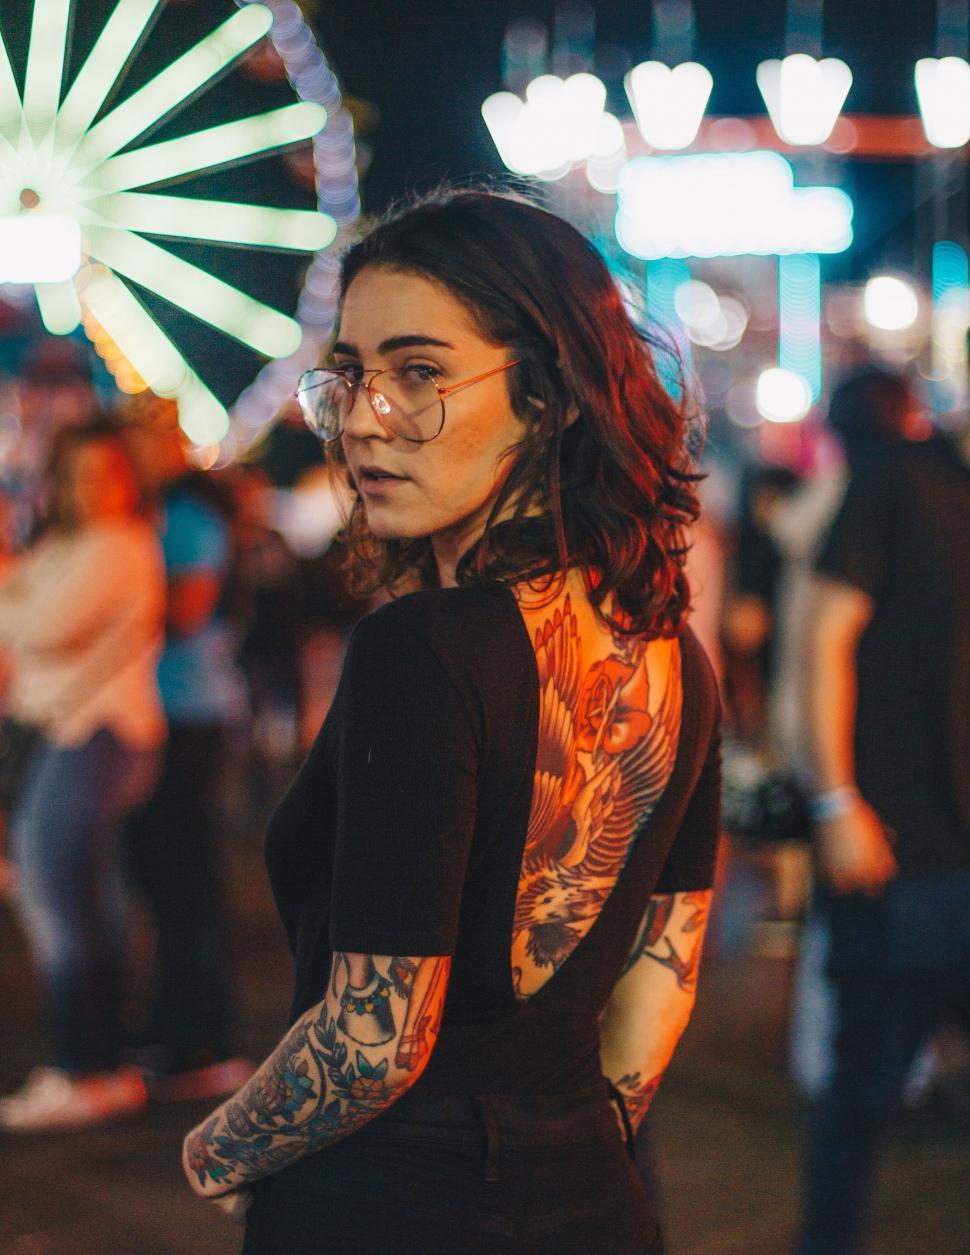 Free Image of Tattooed woman at night festival 